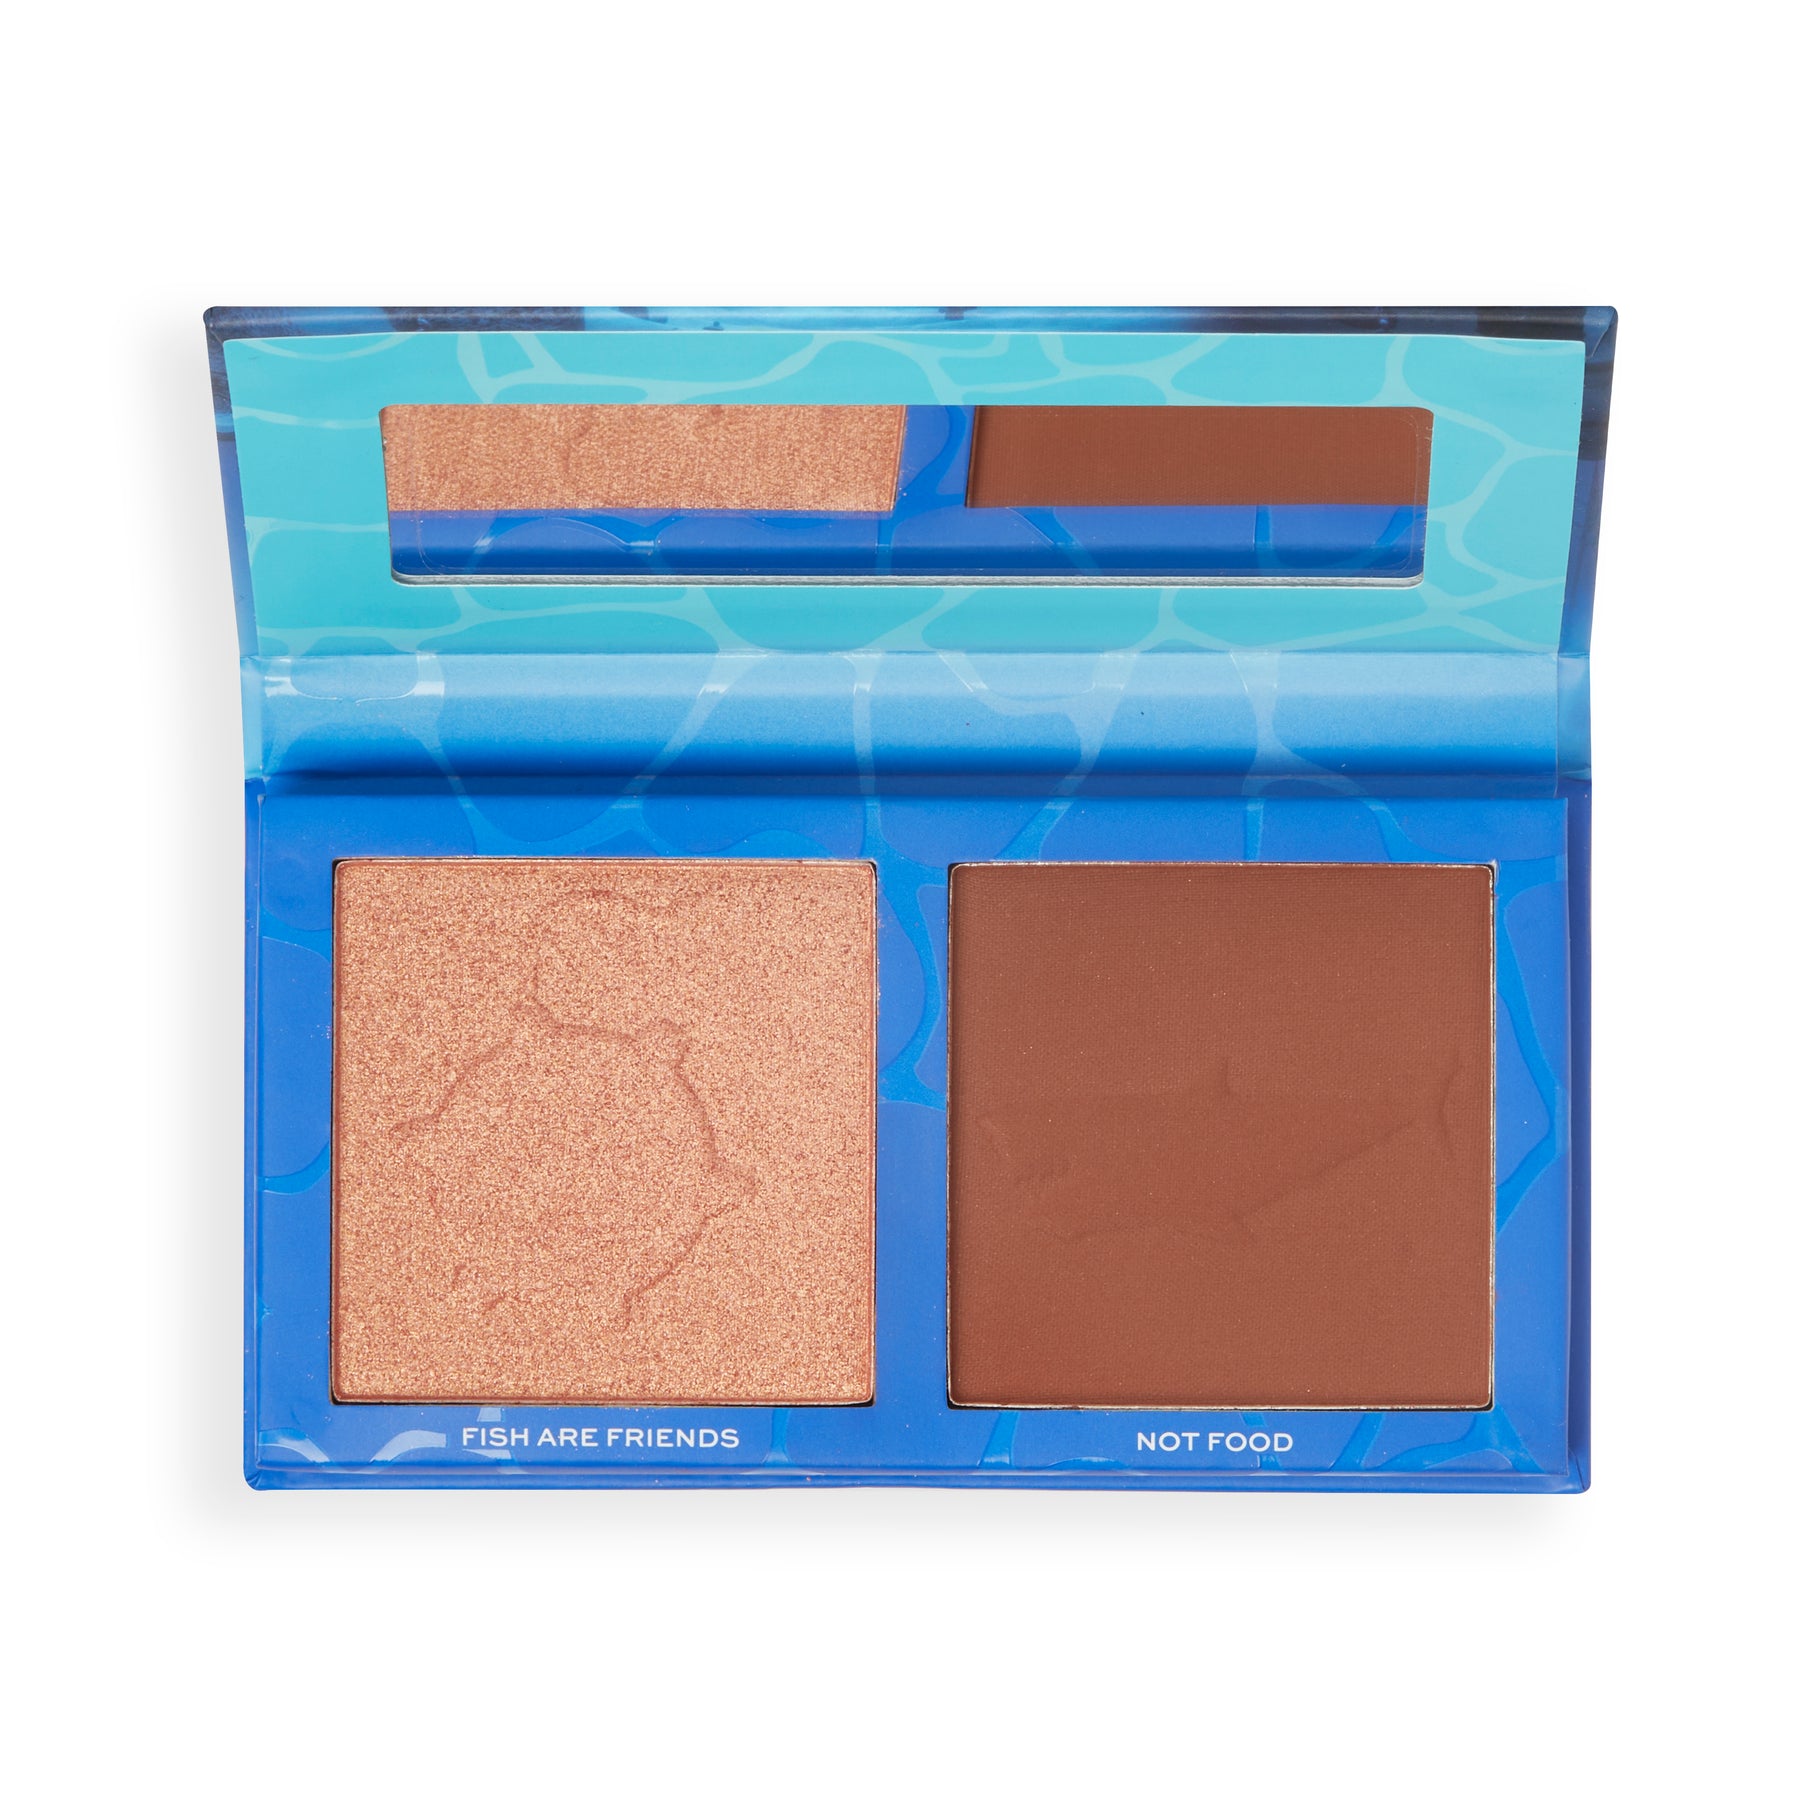 DISNEY PIXAR’S FINDING NEMO AND REVOLUTION FISH ARE FRIENDS BRONZER AND HIGHLIGHTER PALETTE